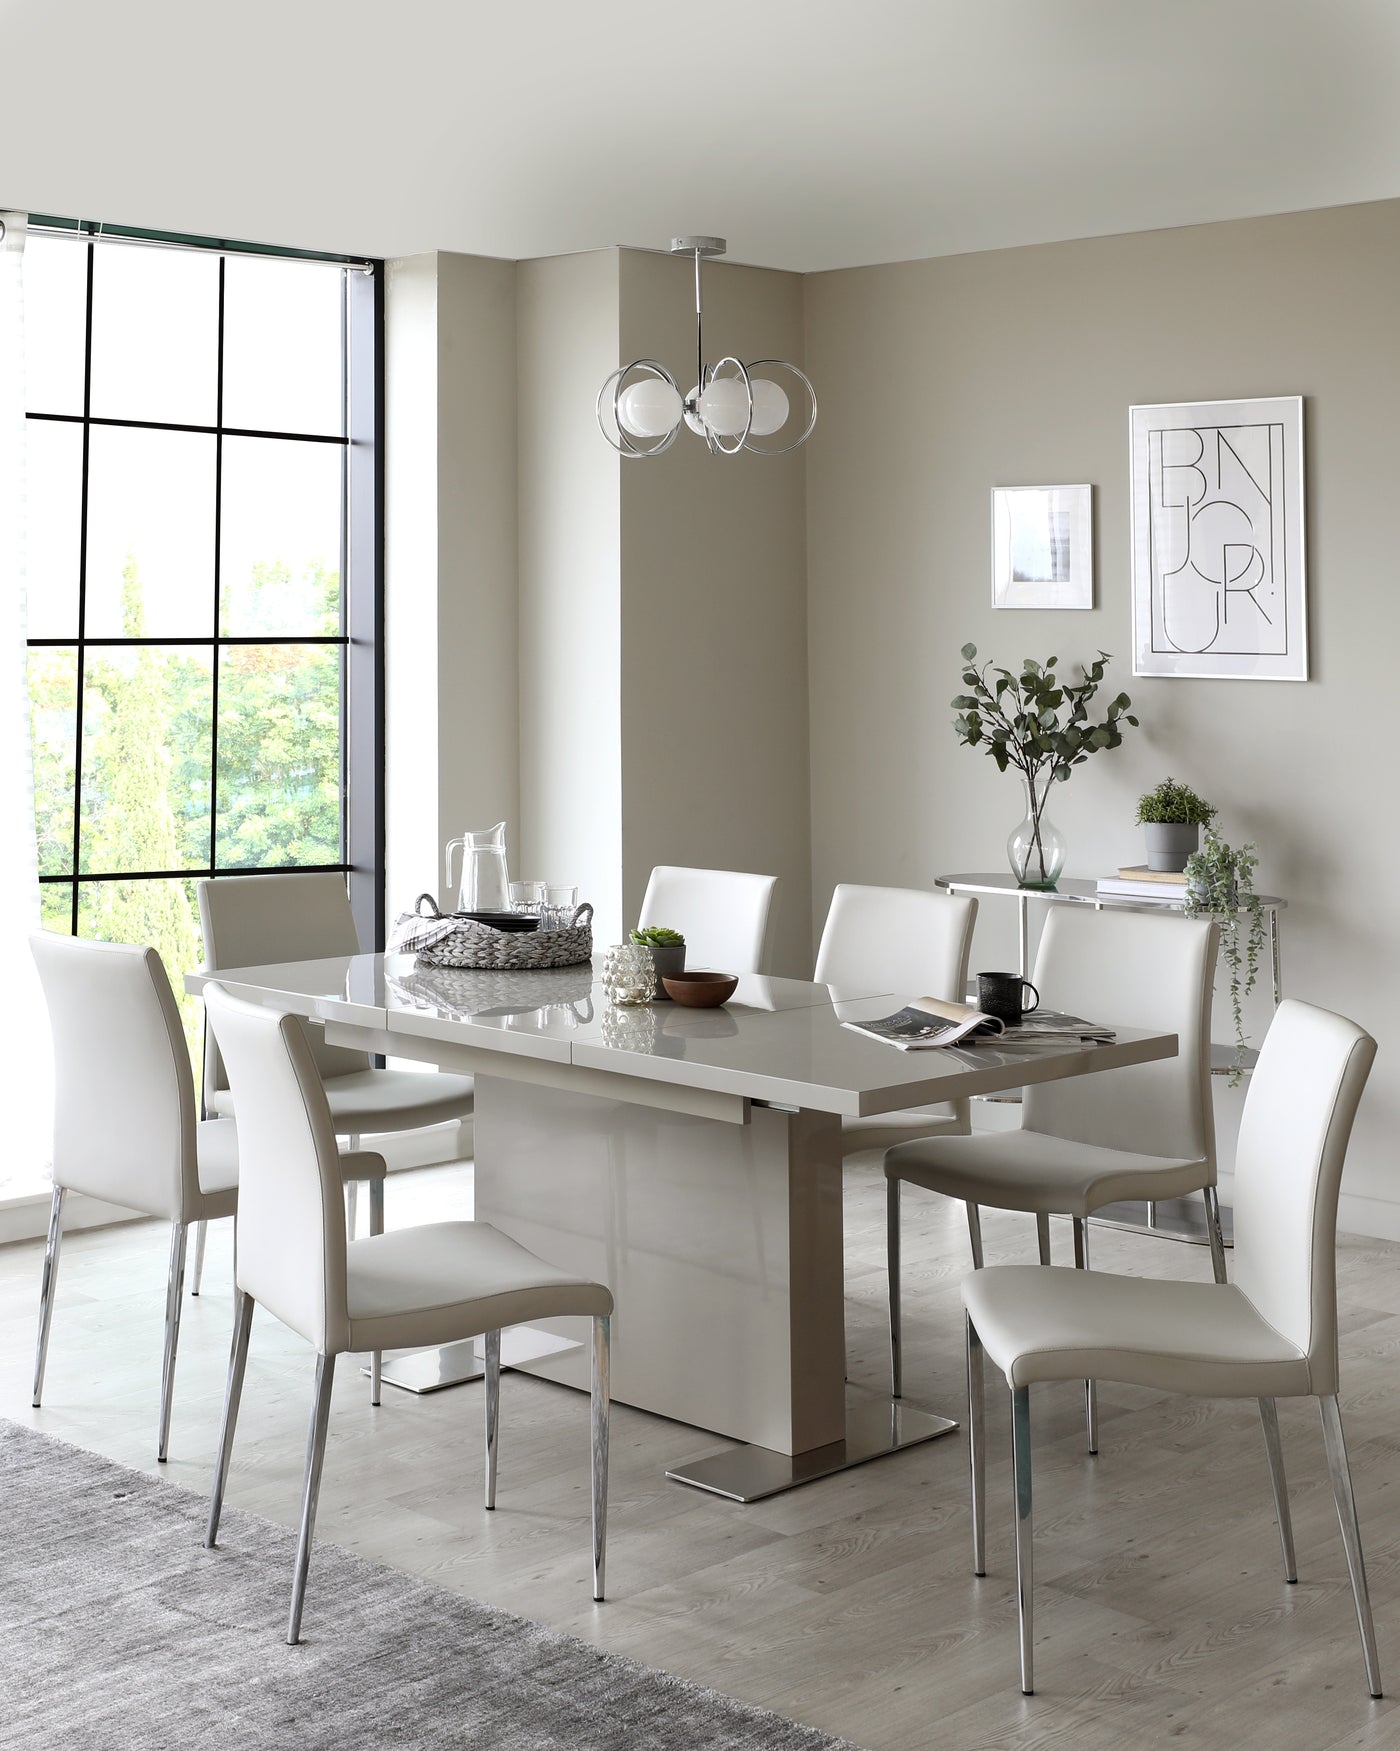 Modern dining room with a rectangular high-gloss finish table and six sleek white leather upholstered chairs with thin chrome legs. A grey area rug lies underneath.